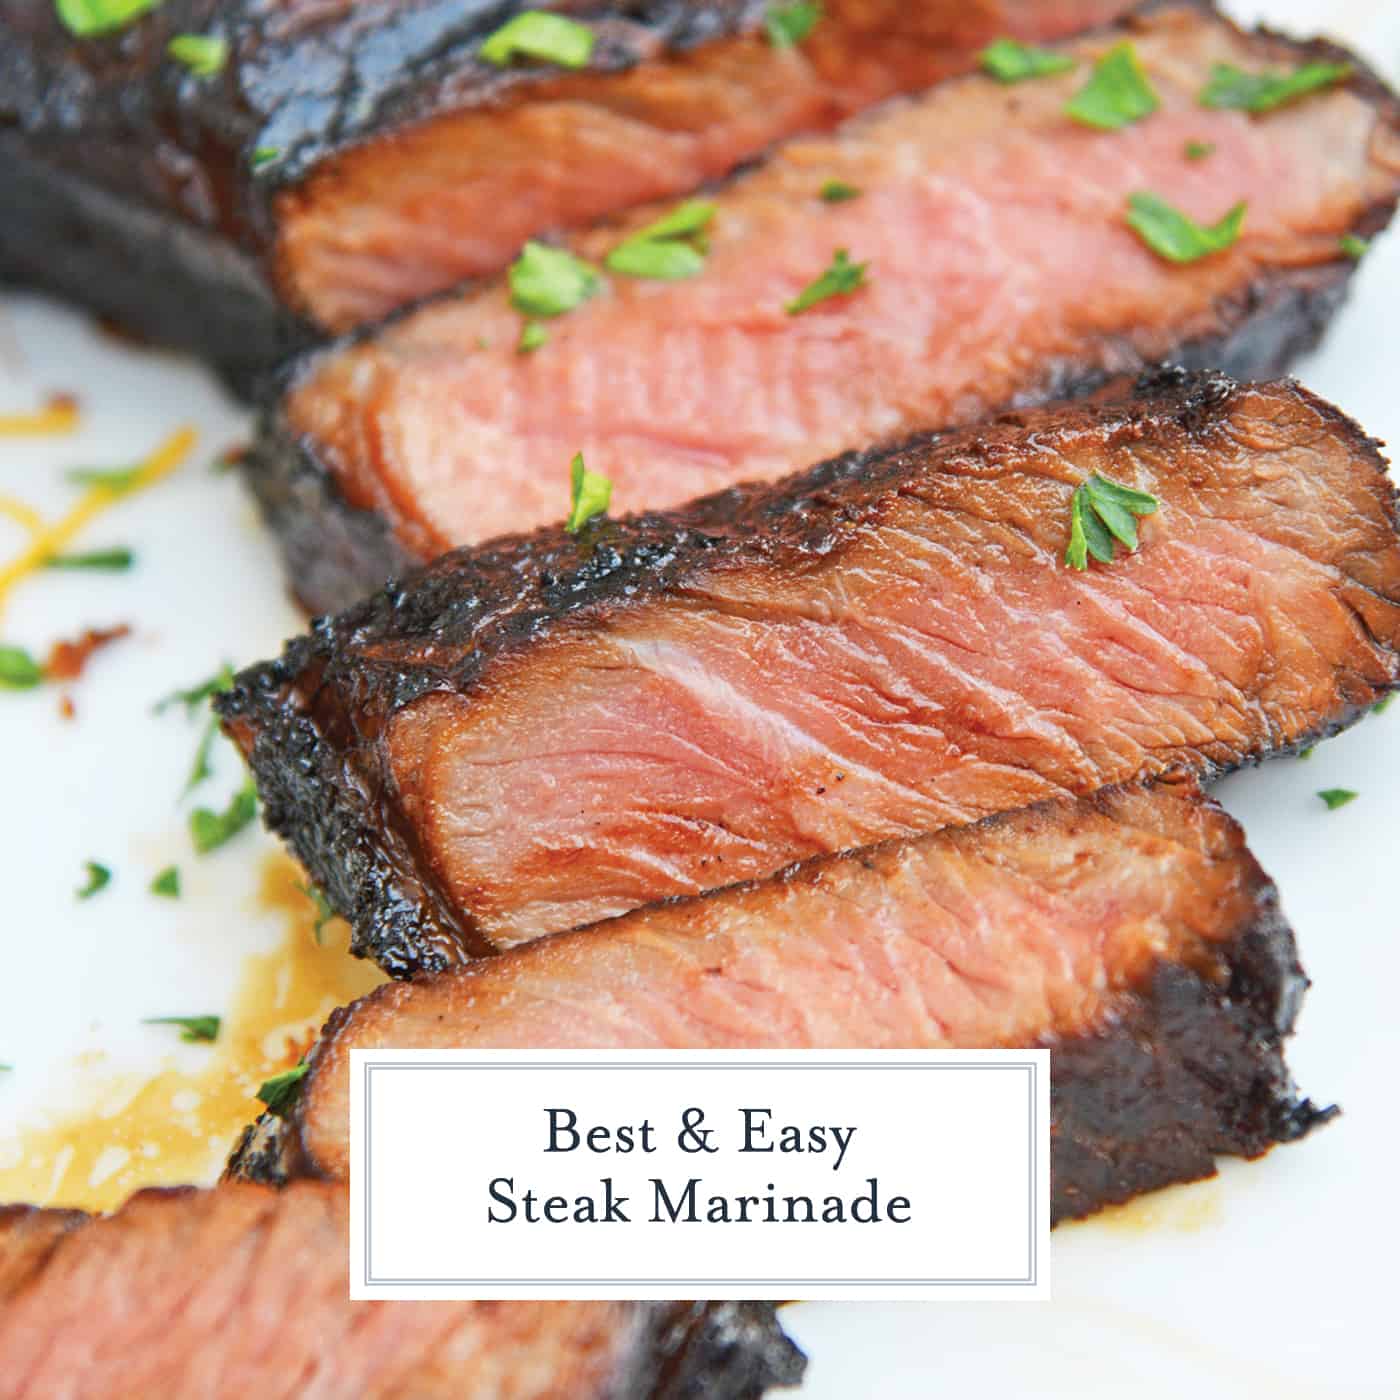 The BEST Easy Steak Marinade will be the only marinade you ever use in the future! You only need 3 ingredients and 30 minutes for this steak marinade. #steakmarinade #beststeakmarinade www.savoryexperiments.com